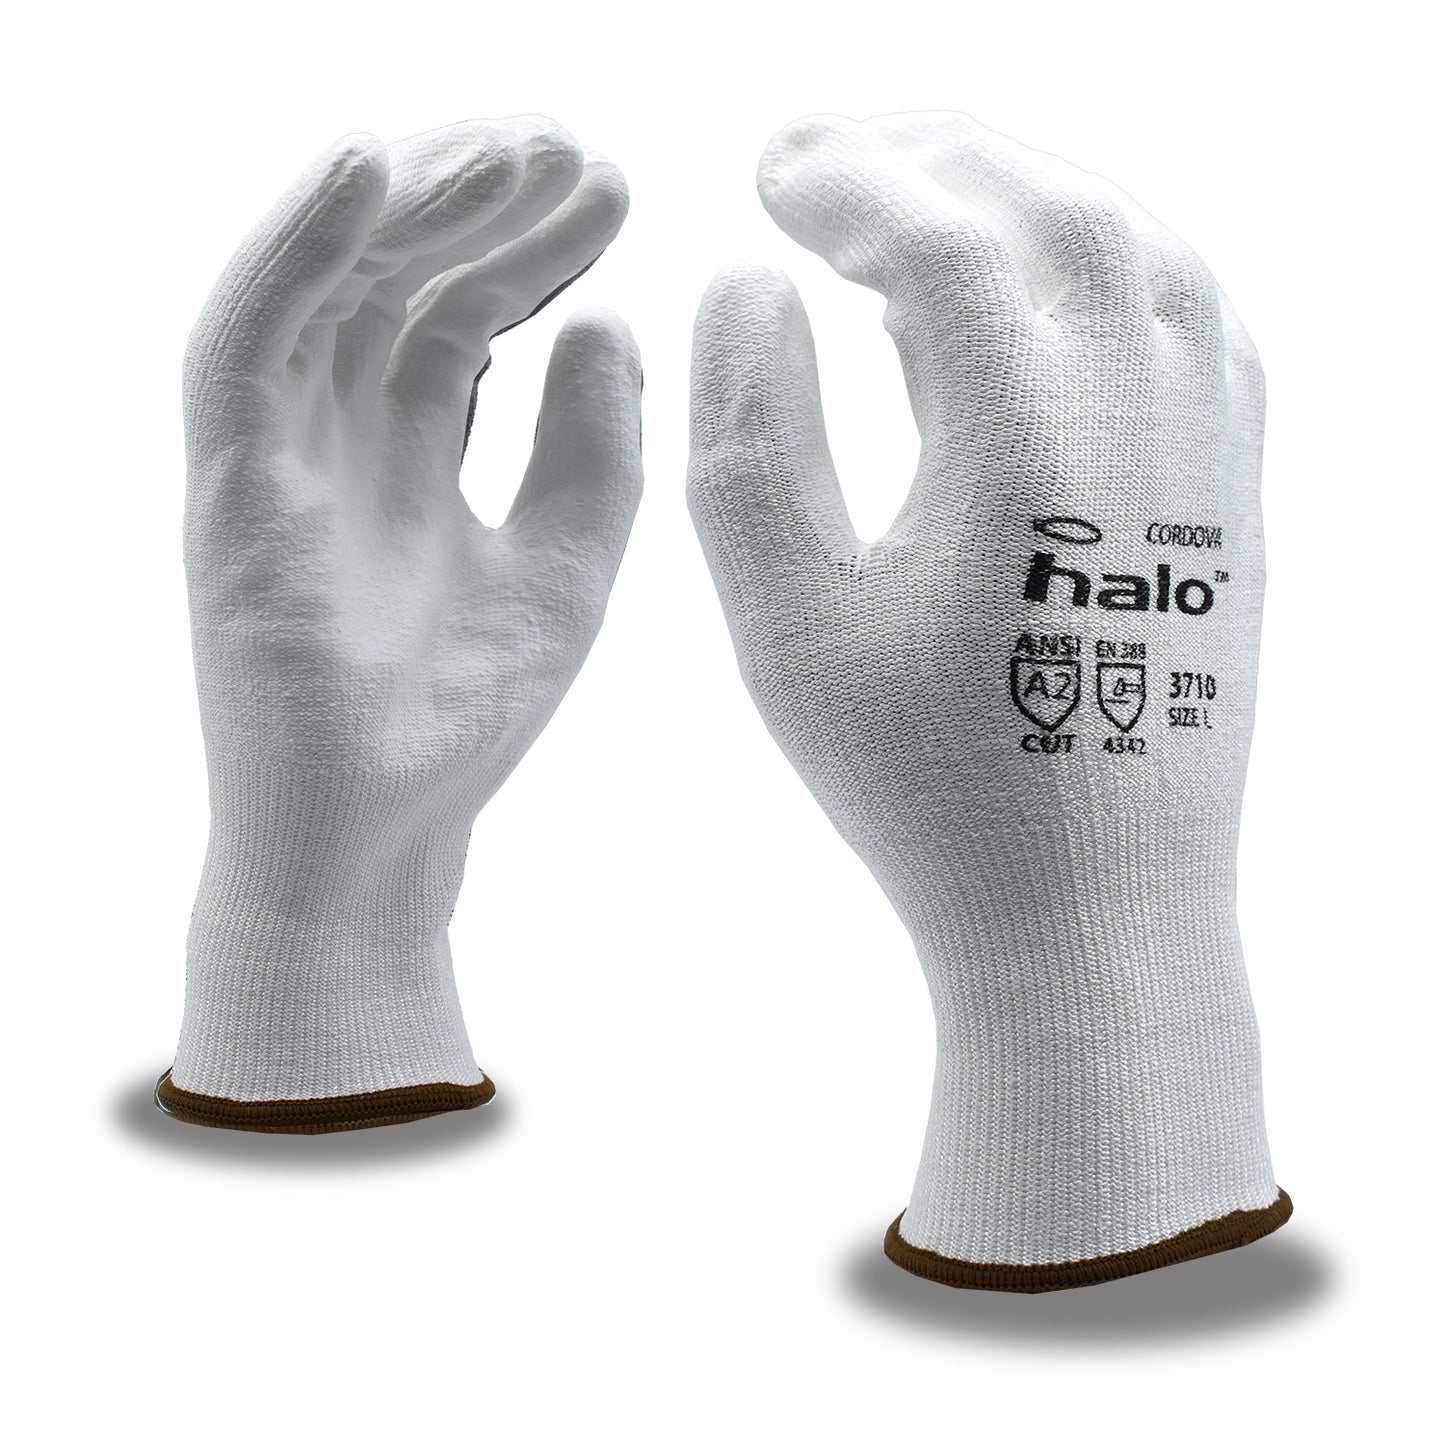 Halo Cut-Resistant Gloves, ANSI Cut Level A2